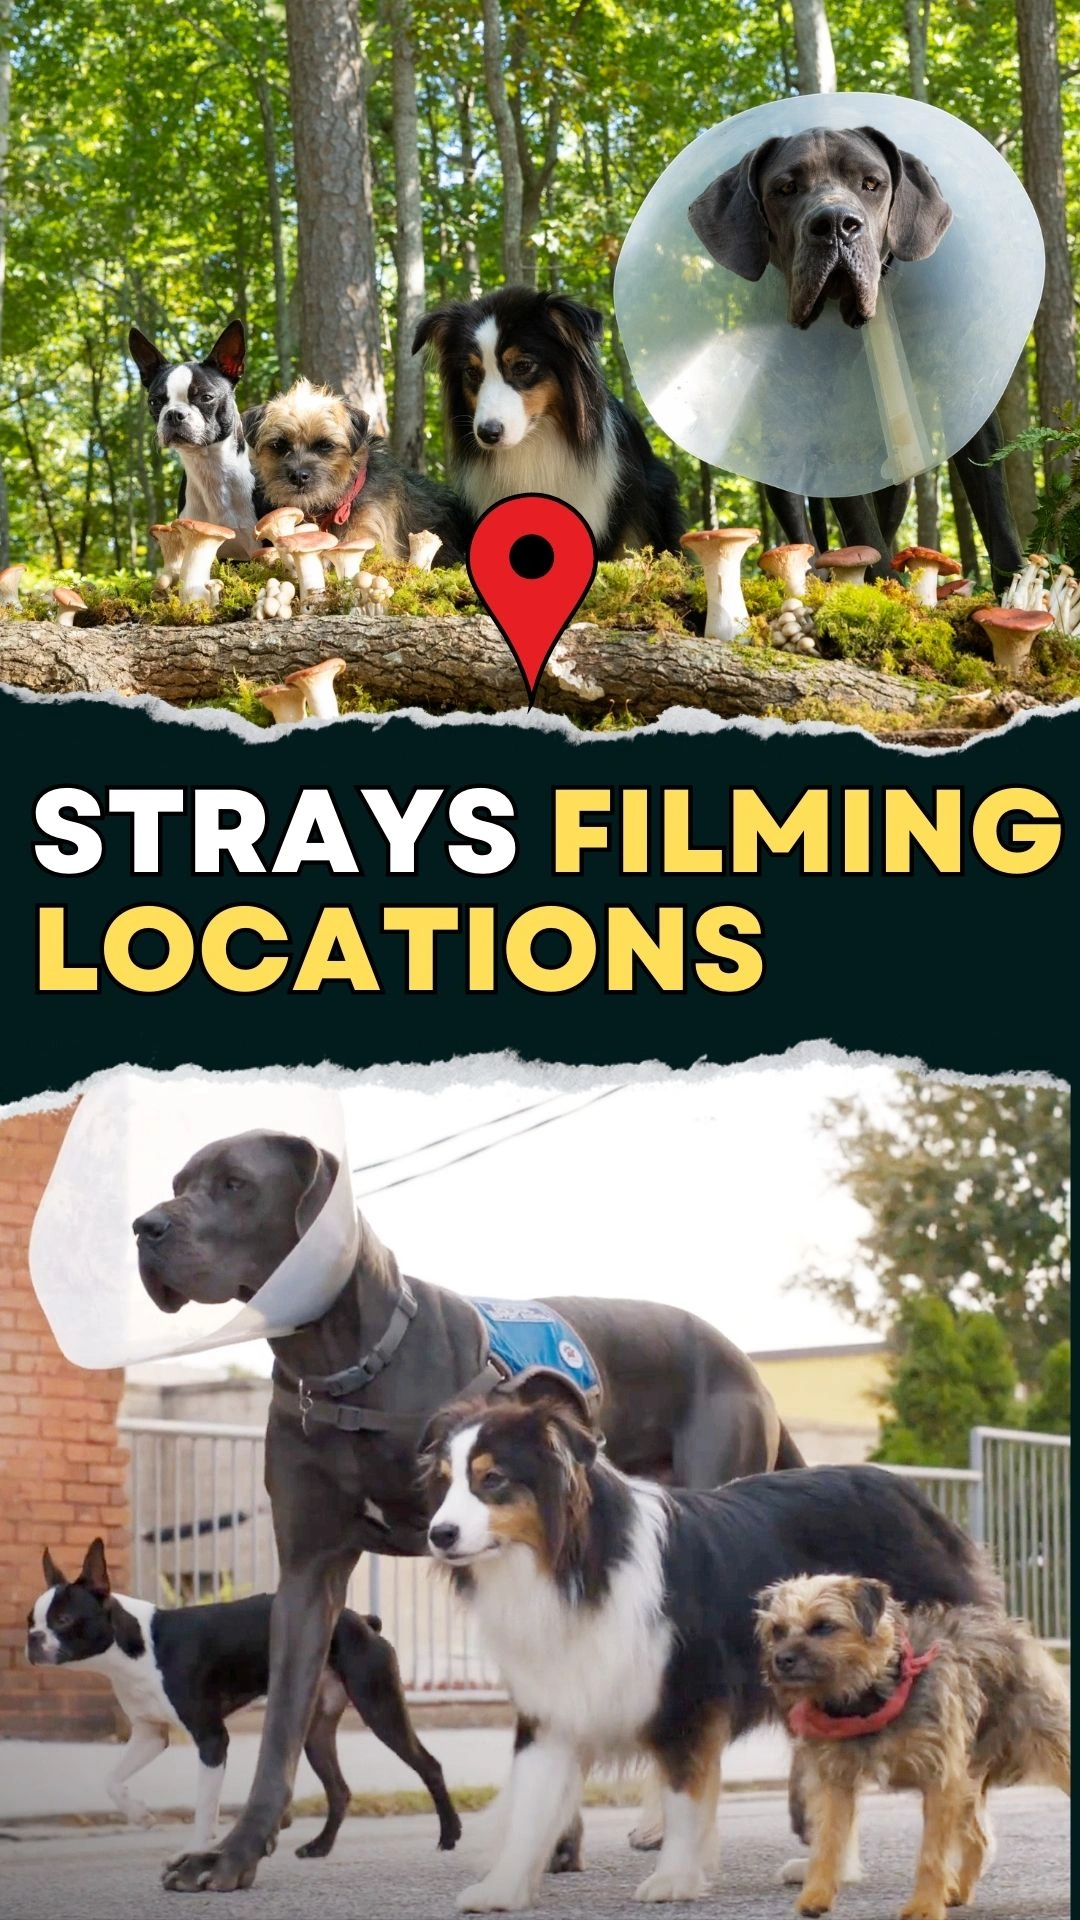 Strays Filming Locations